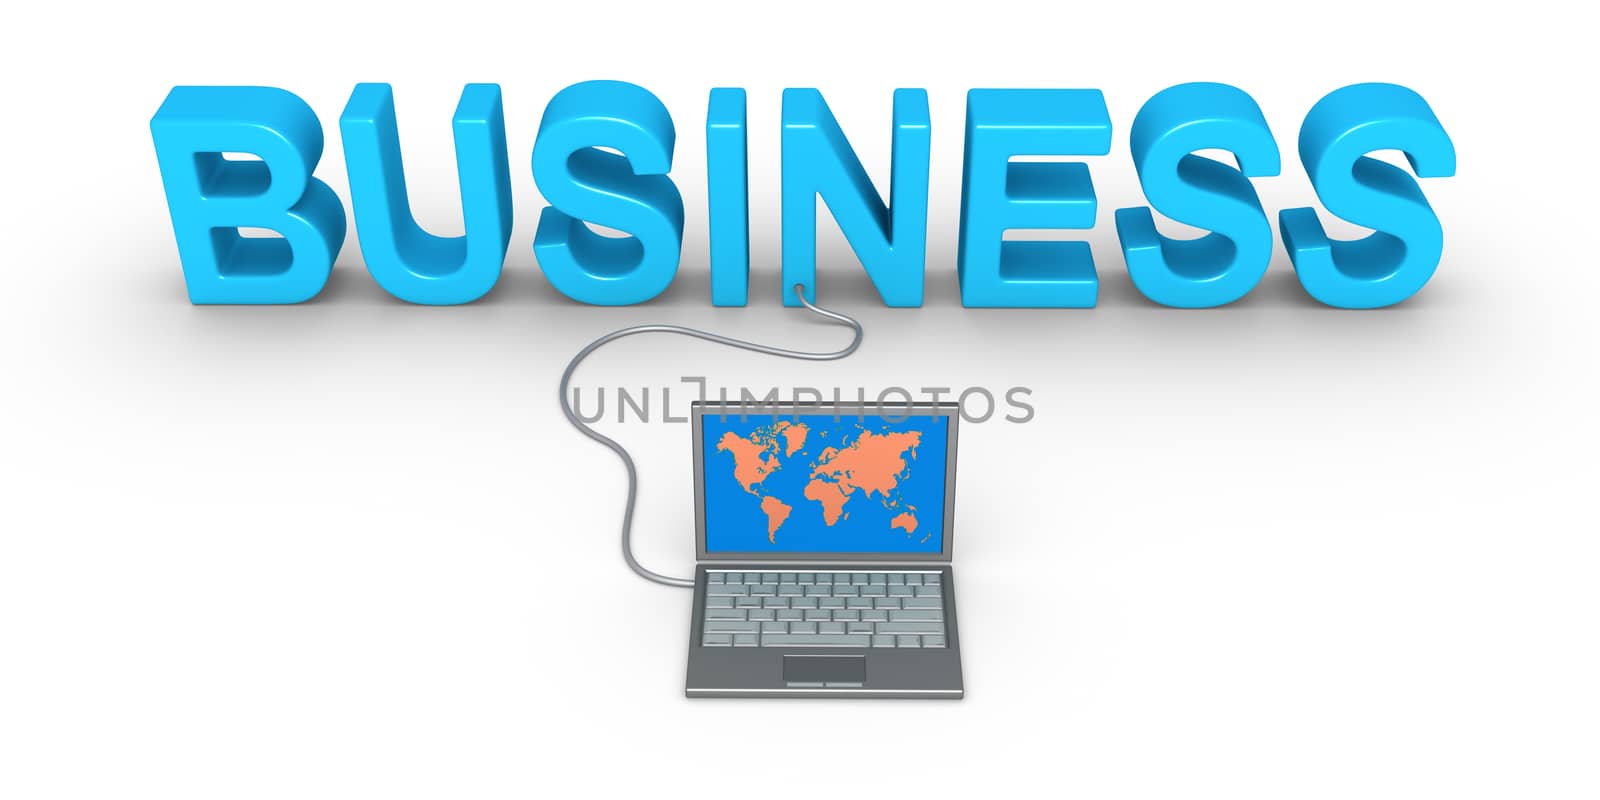 Business word and laptop by 6kor3dos